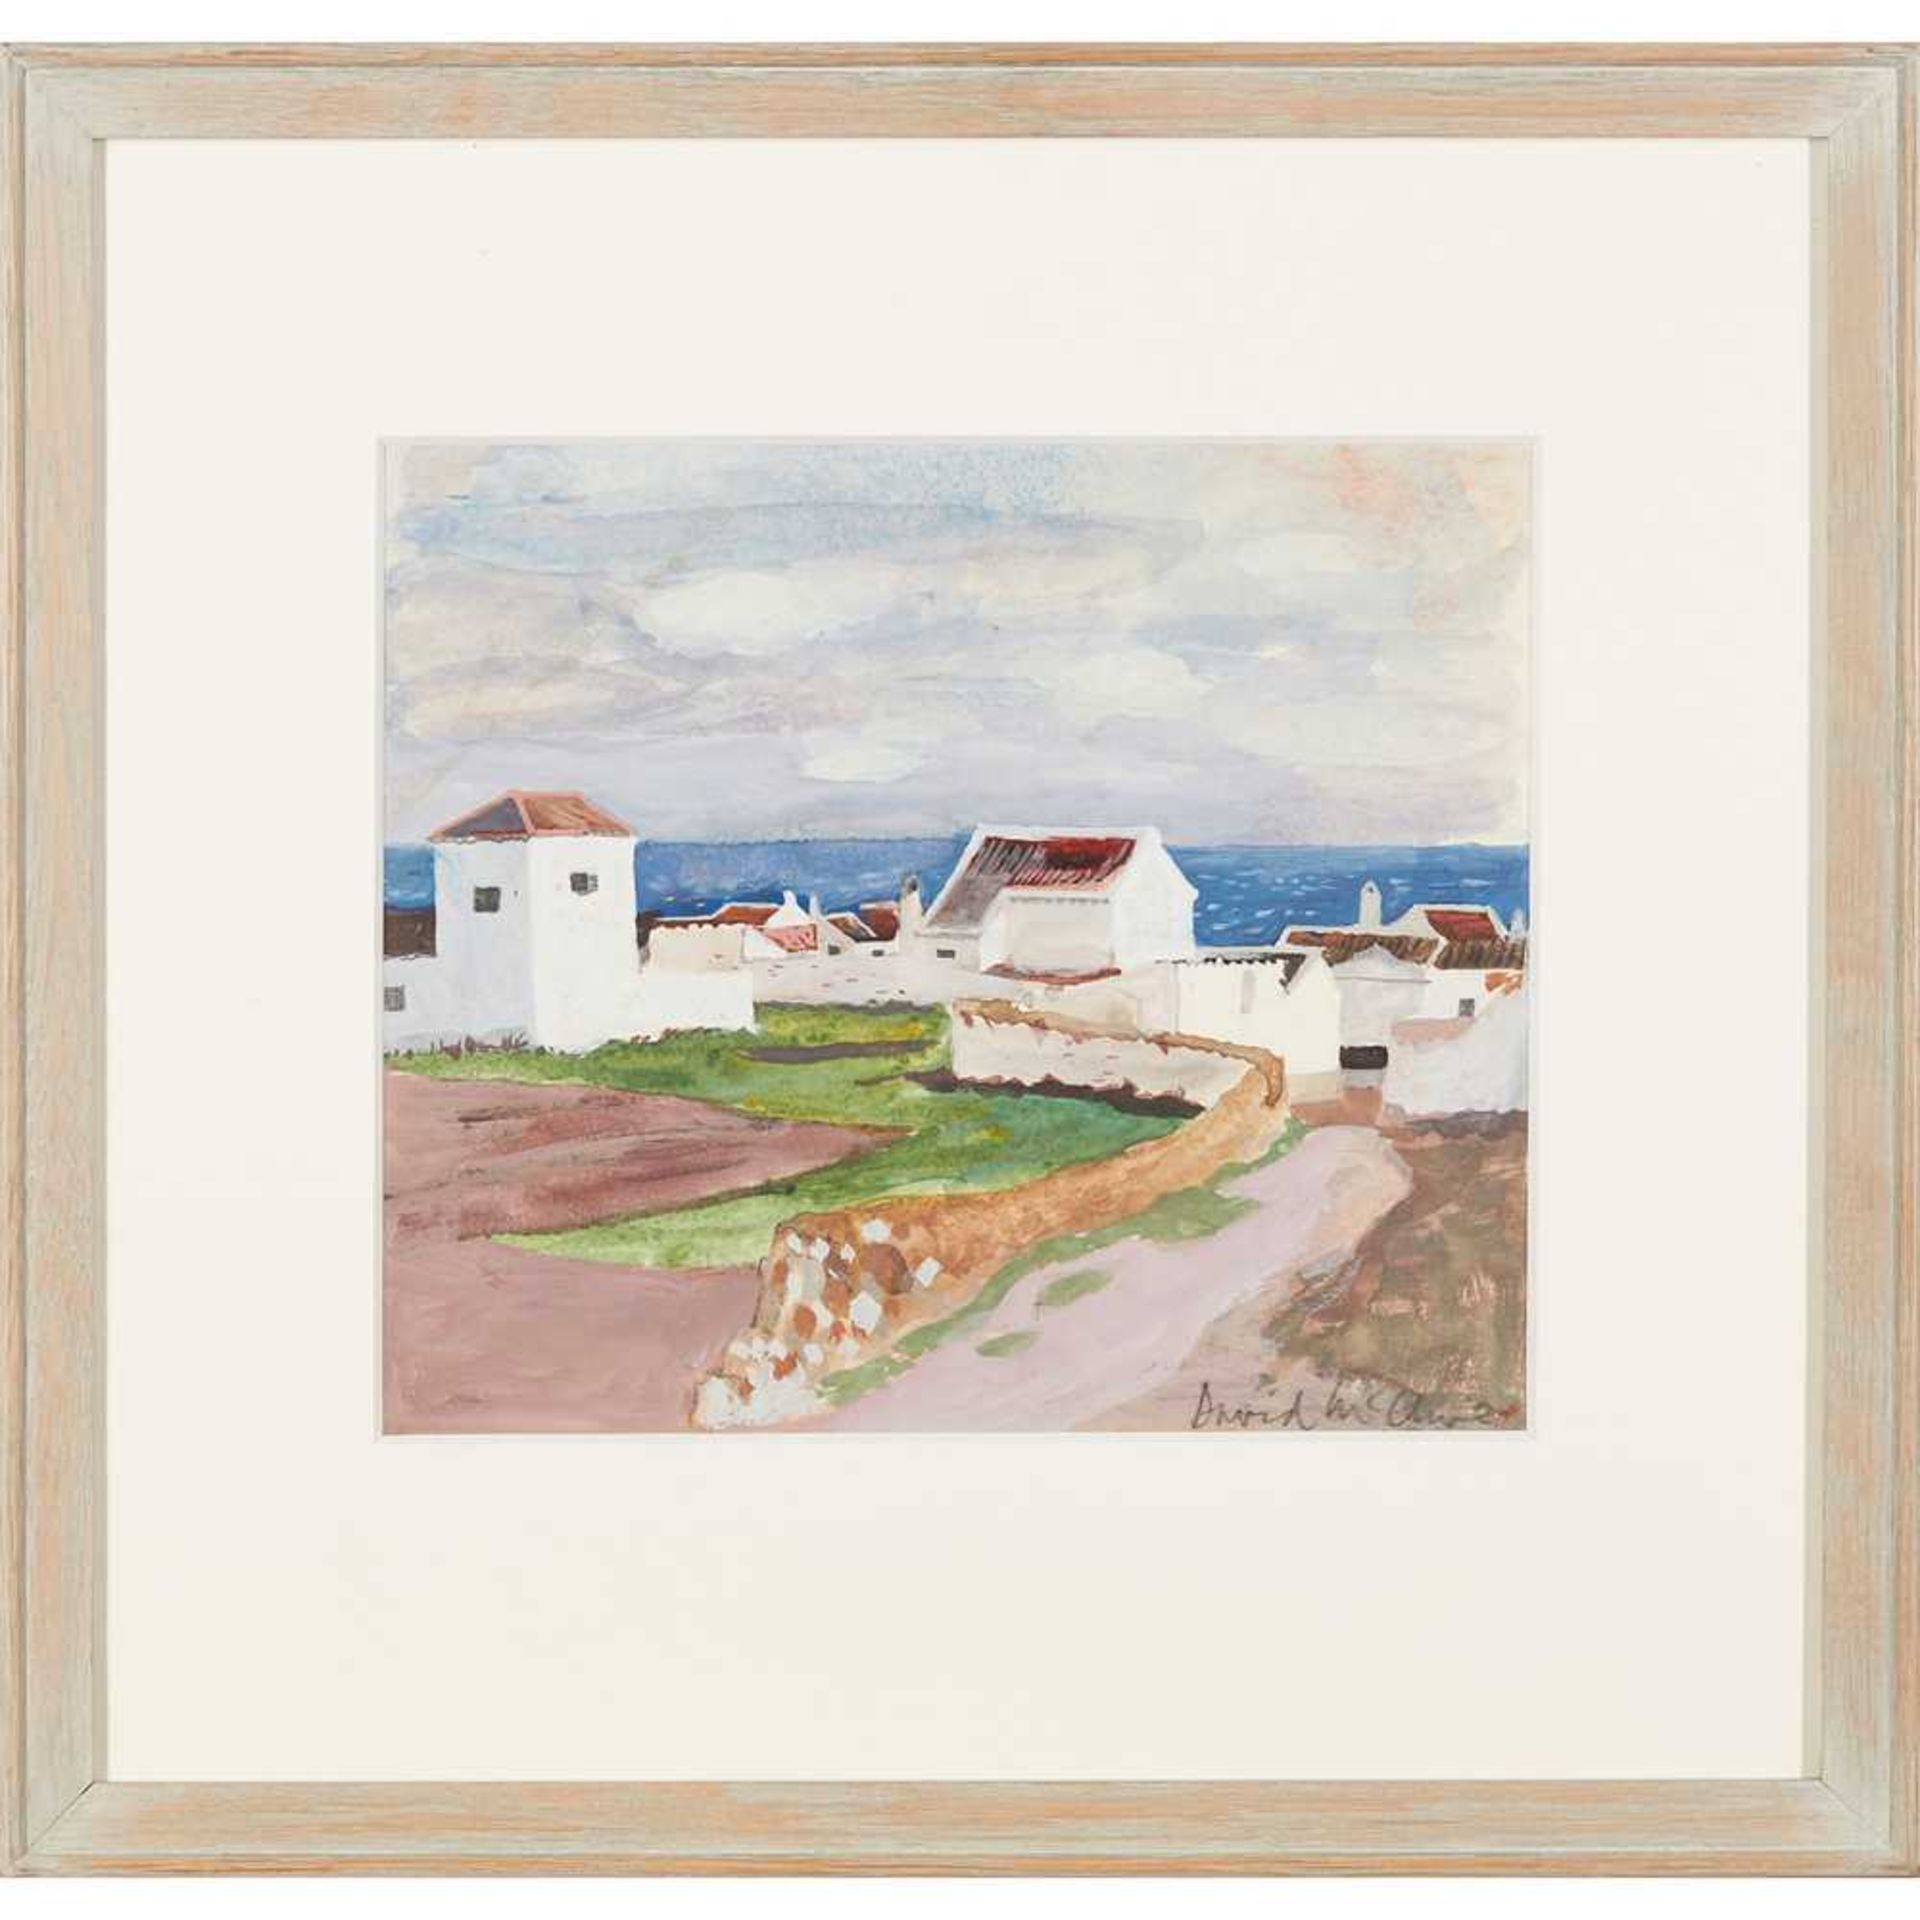 § DAVID MCCLURE R.S.A., R.S.W. (SCOTTISH 1926-1998) VILLAGE BY THE SEA, SPAIN - Image 4 of 6